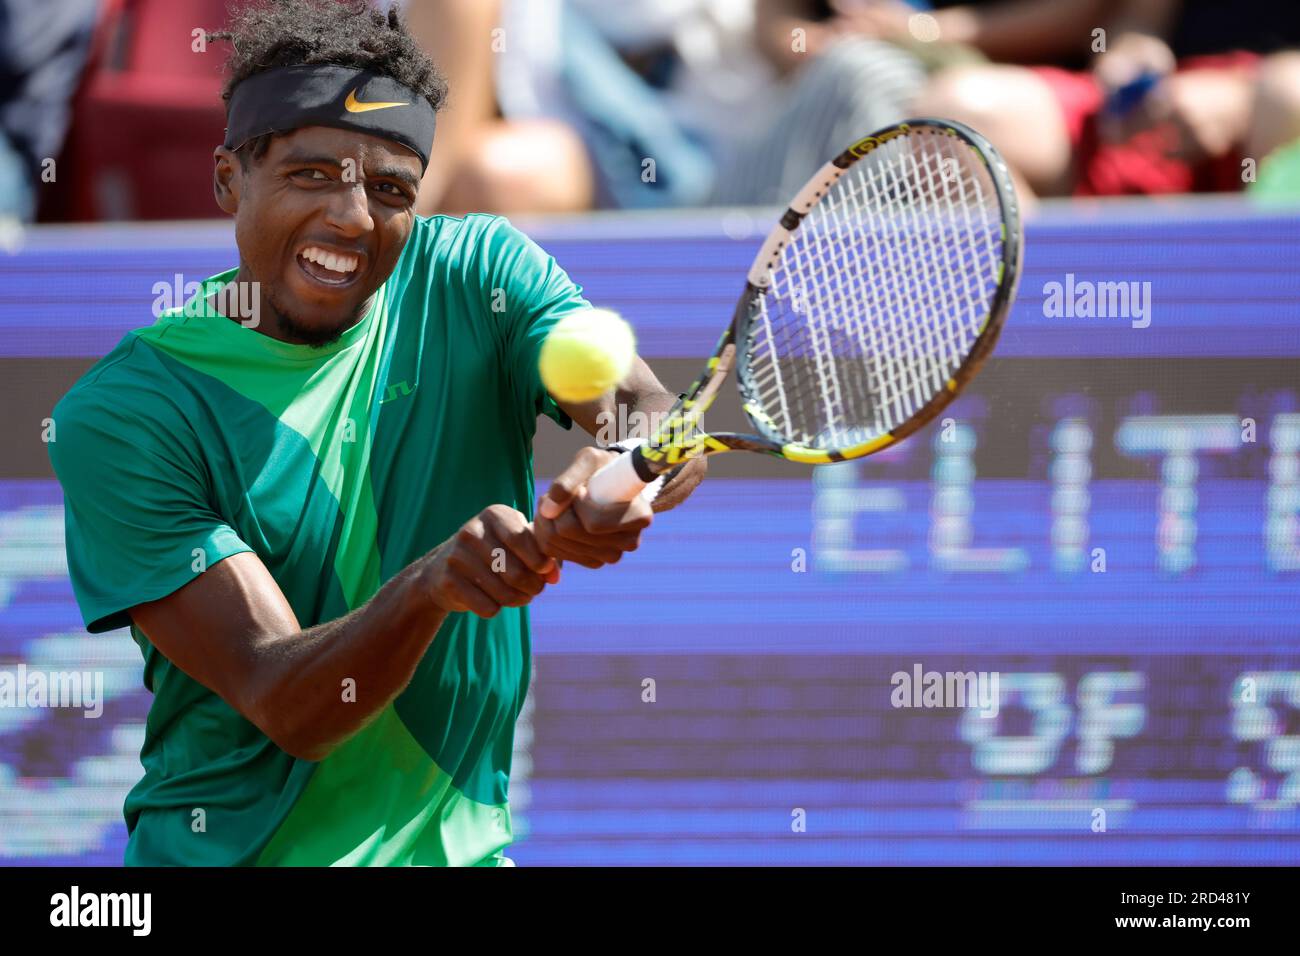 Elias Ymer of Sweden in action during a tennis match against Leo Borg of Sweden during the Swedish Open ATP tennis tournament in Bastad, Sweden, on July 18, 2023.Photo Adam Ihse /